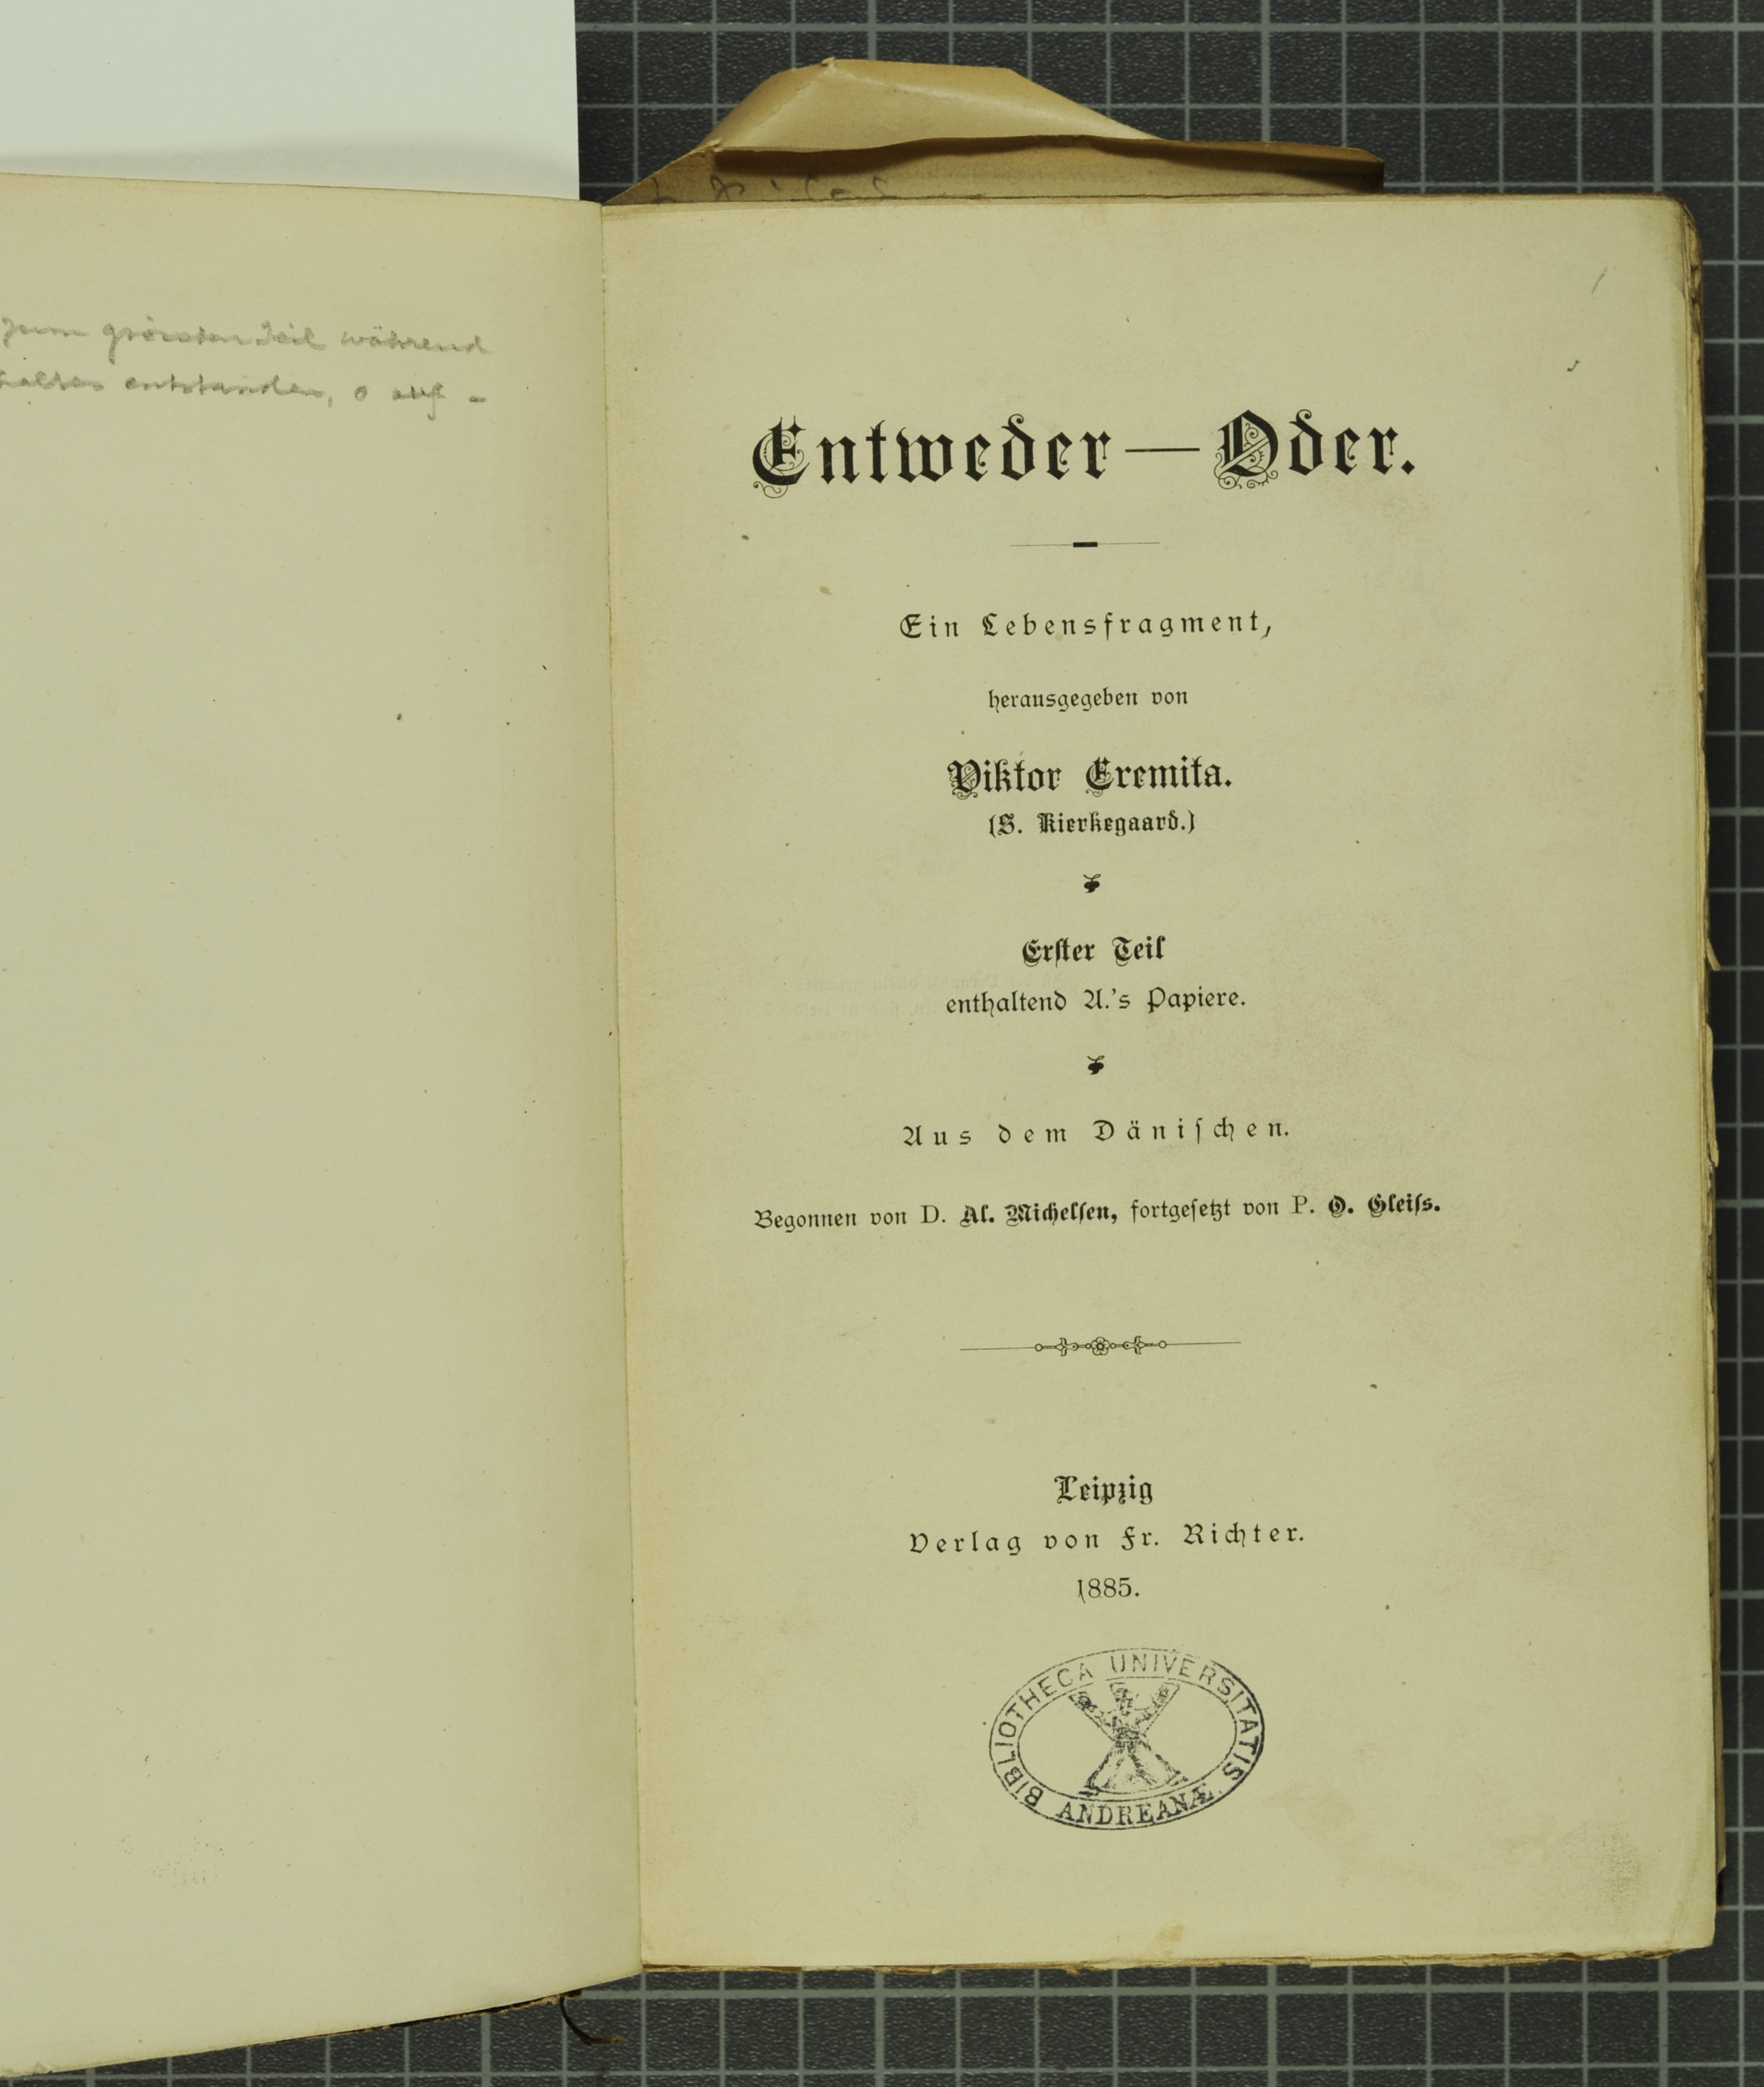 Written in fraktur, the title page of Entweder - Oder. Ein Lebensfragment by Søren Kierkegaard, translated into German by Al. Michelsen and O. Gleiss.  (And PT8142.E6M4) It’s one of several books by and about the Danish philosopher housed in the Anderson collection. 